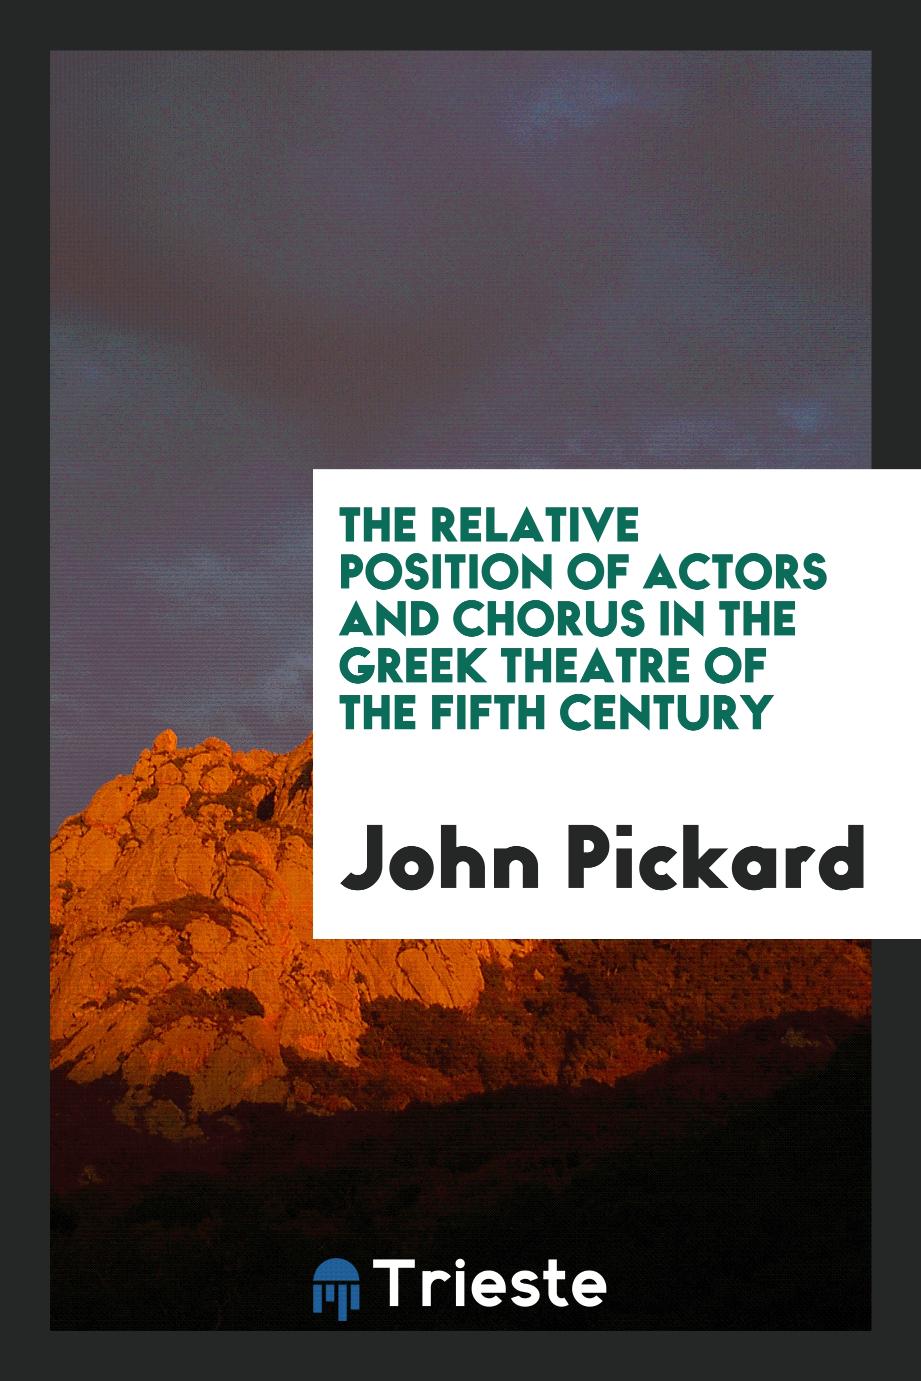 The Relative Position of Actors and Chorus in the Greek Theatre of the Fifth Century